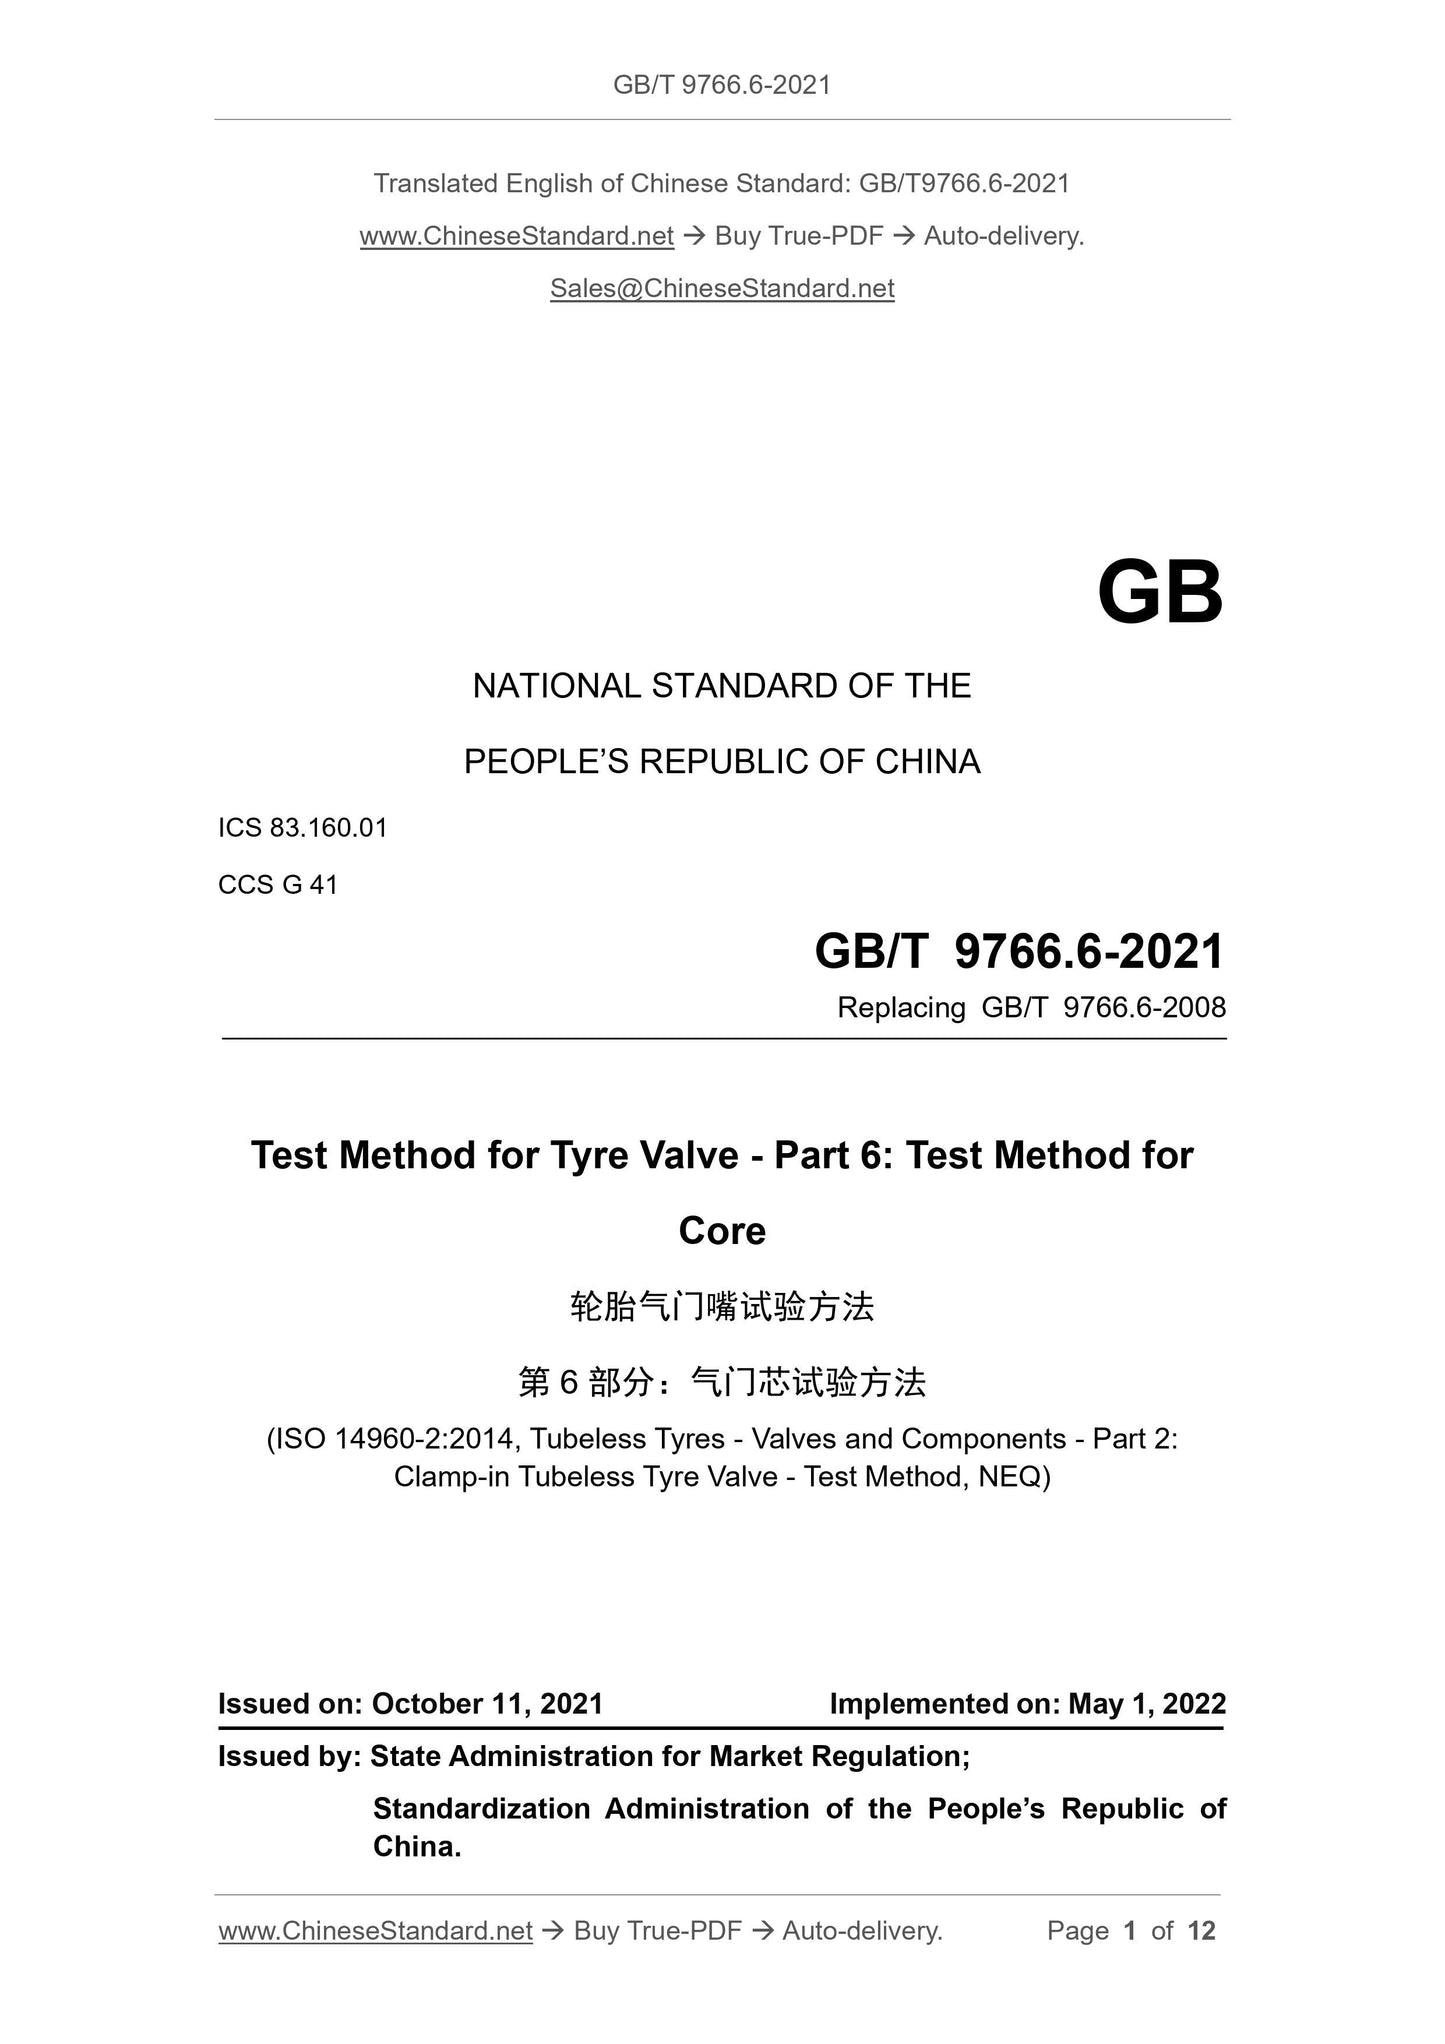 GB/T 9766.6-2021 Page 1